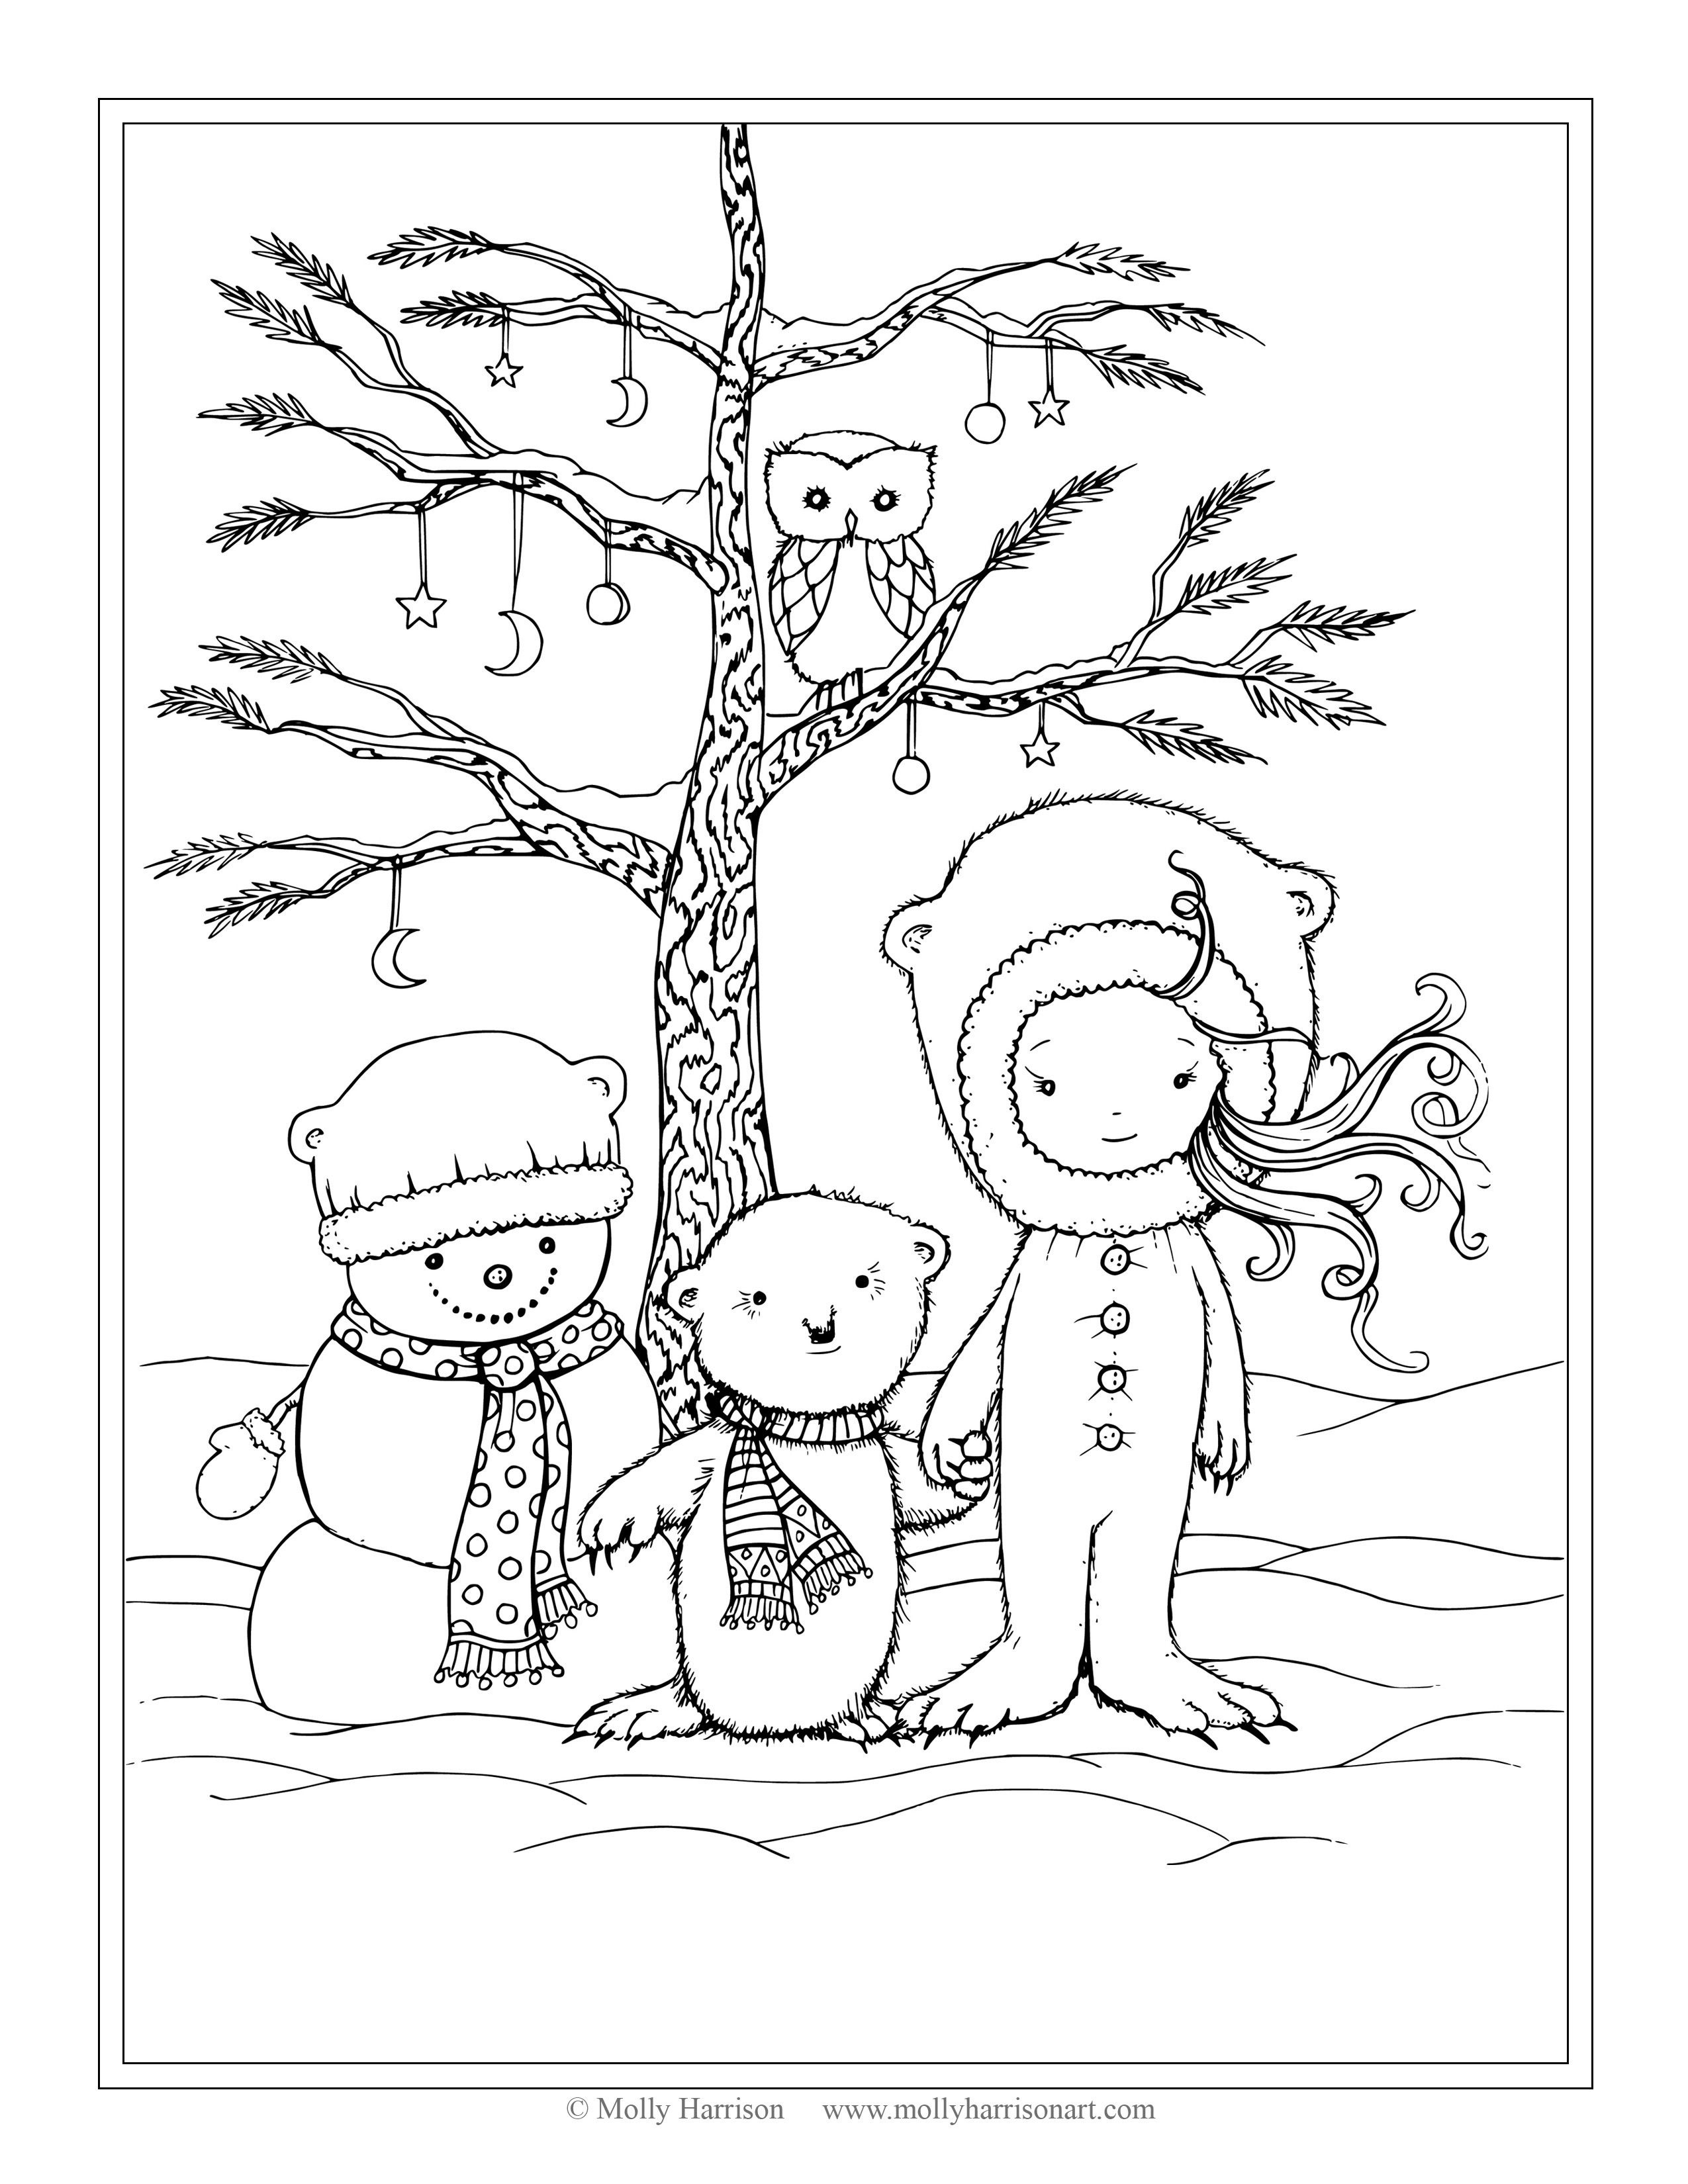 Winter Scene Coloring Pages For Adults At GetDrawings Free Download